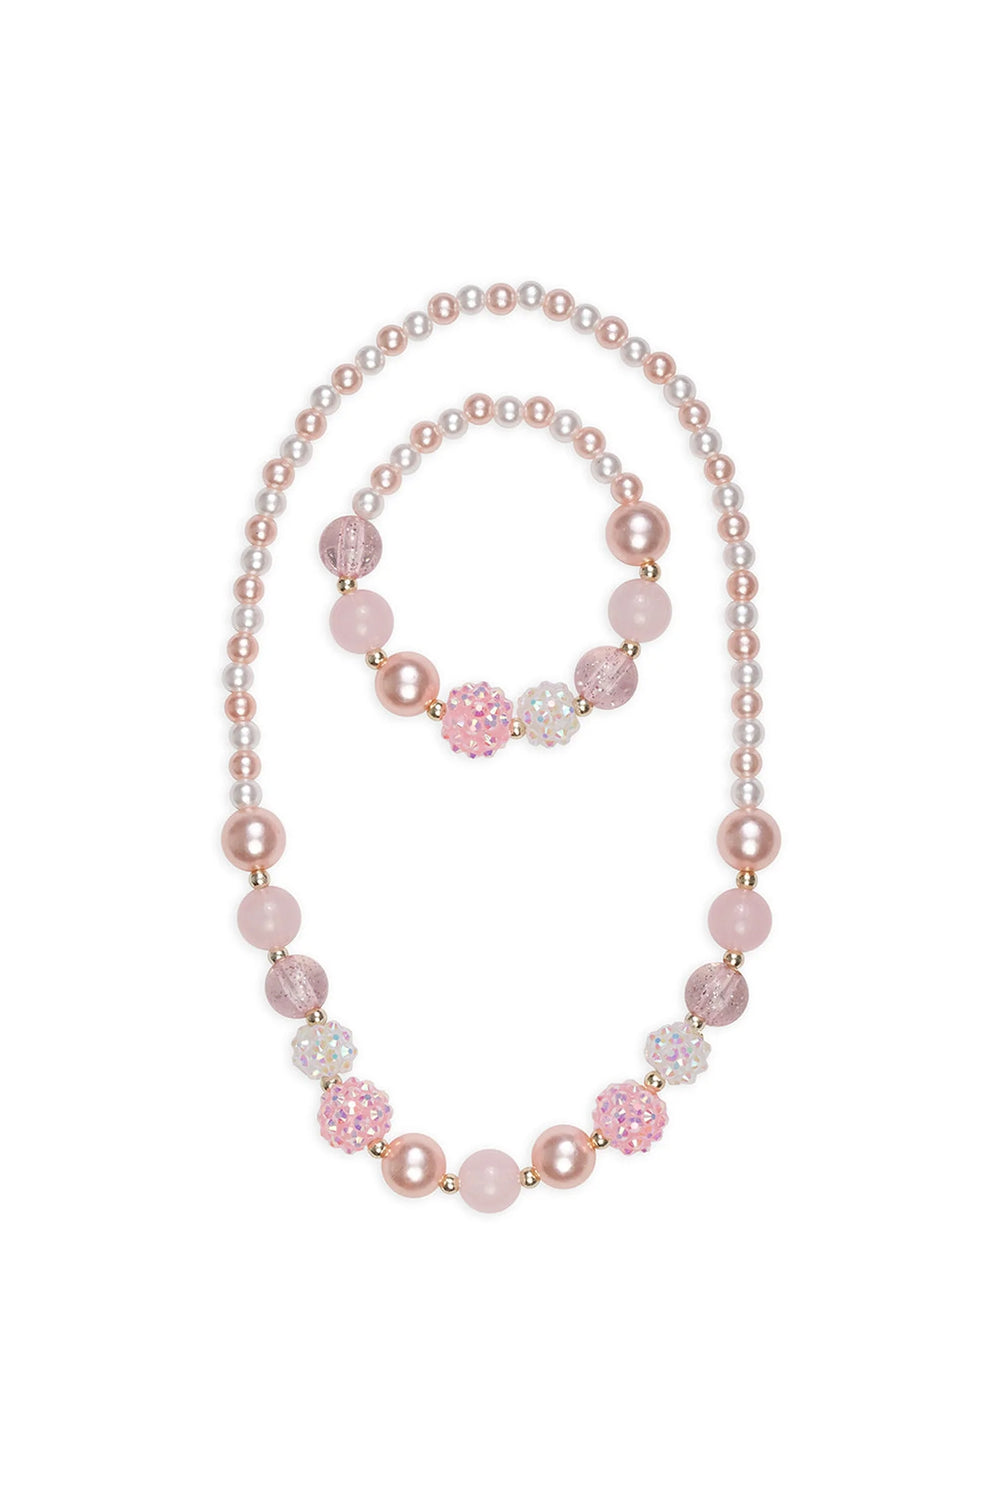 PINKY PEARL NECKLACE AND BRACELET